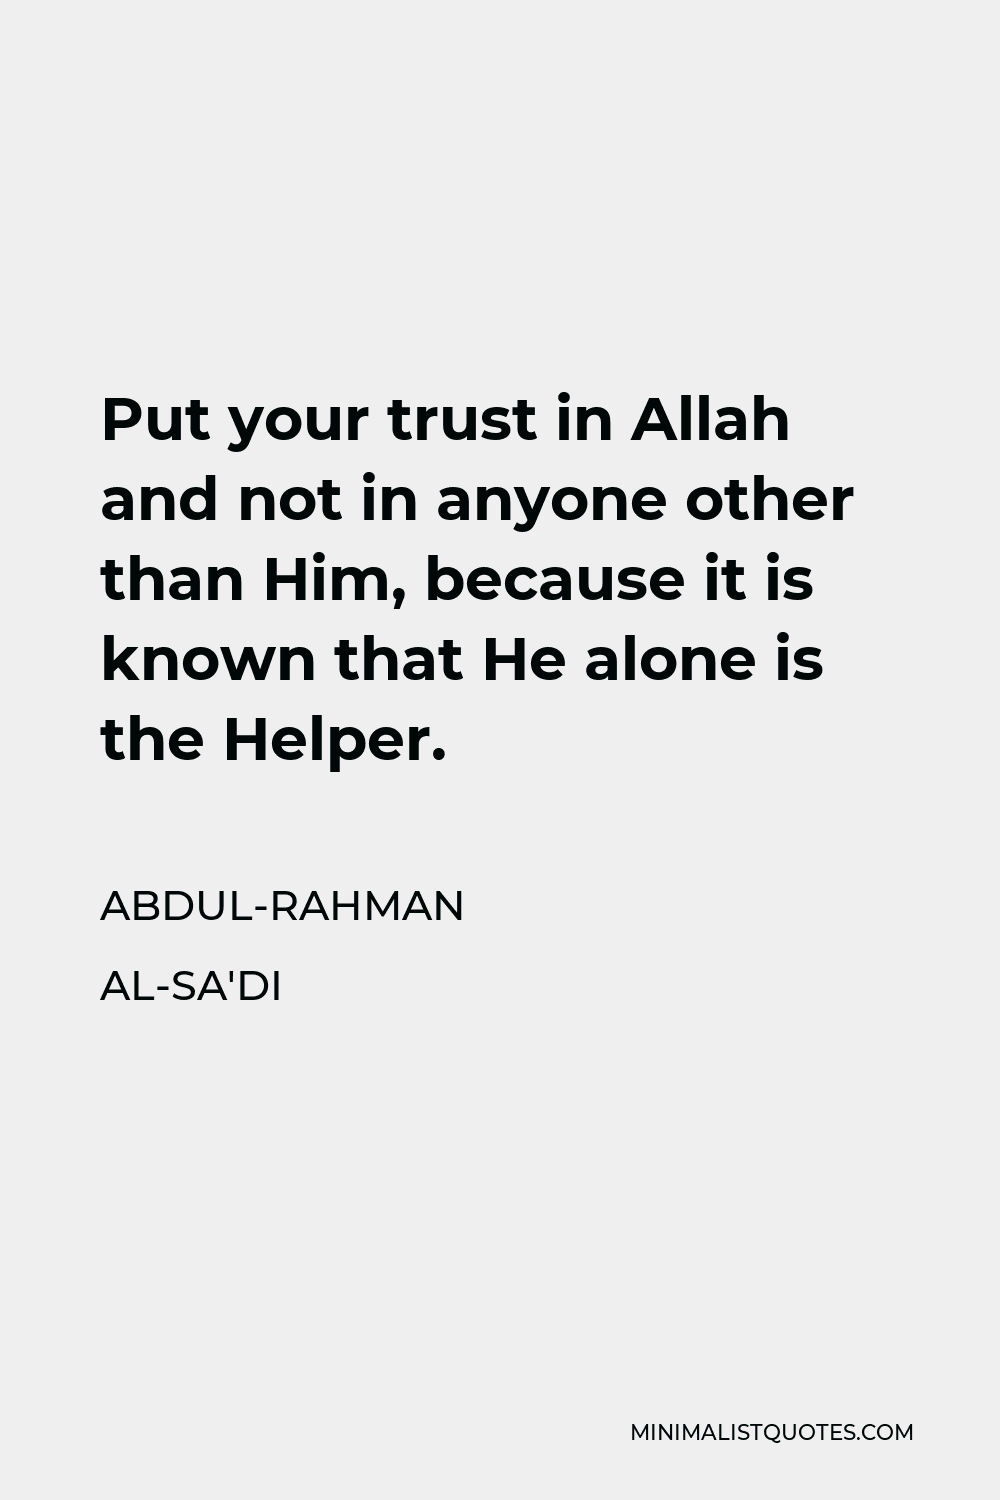 Abdul-Rahman al-Sa'di Quote - Put your trust in Allah and not in anyone other than Him, because it is known that He alone is the Helper.